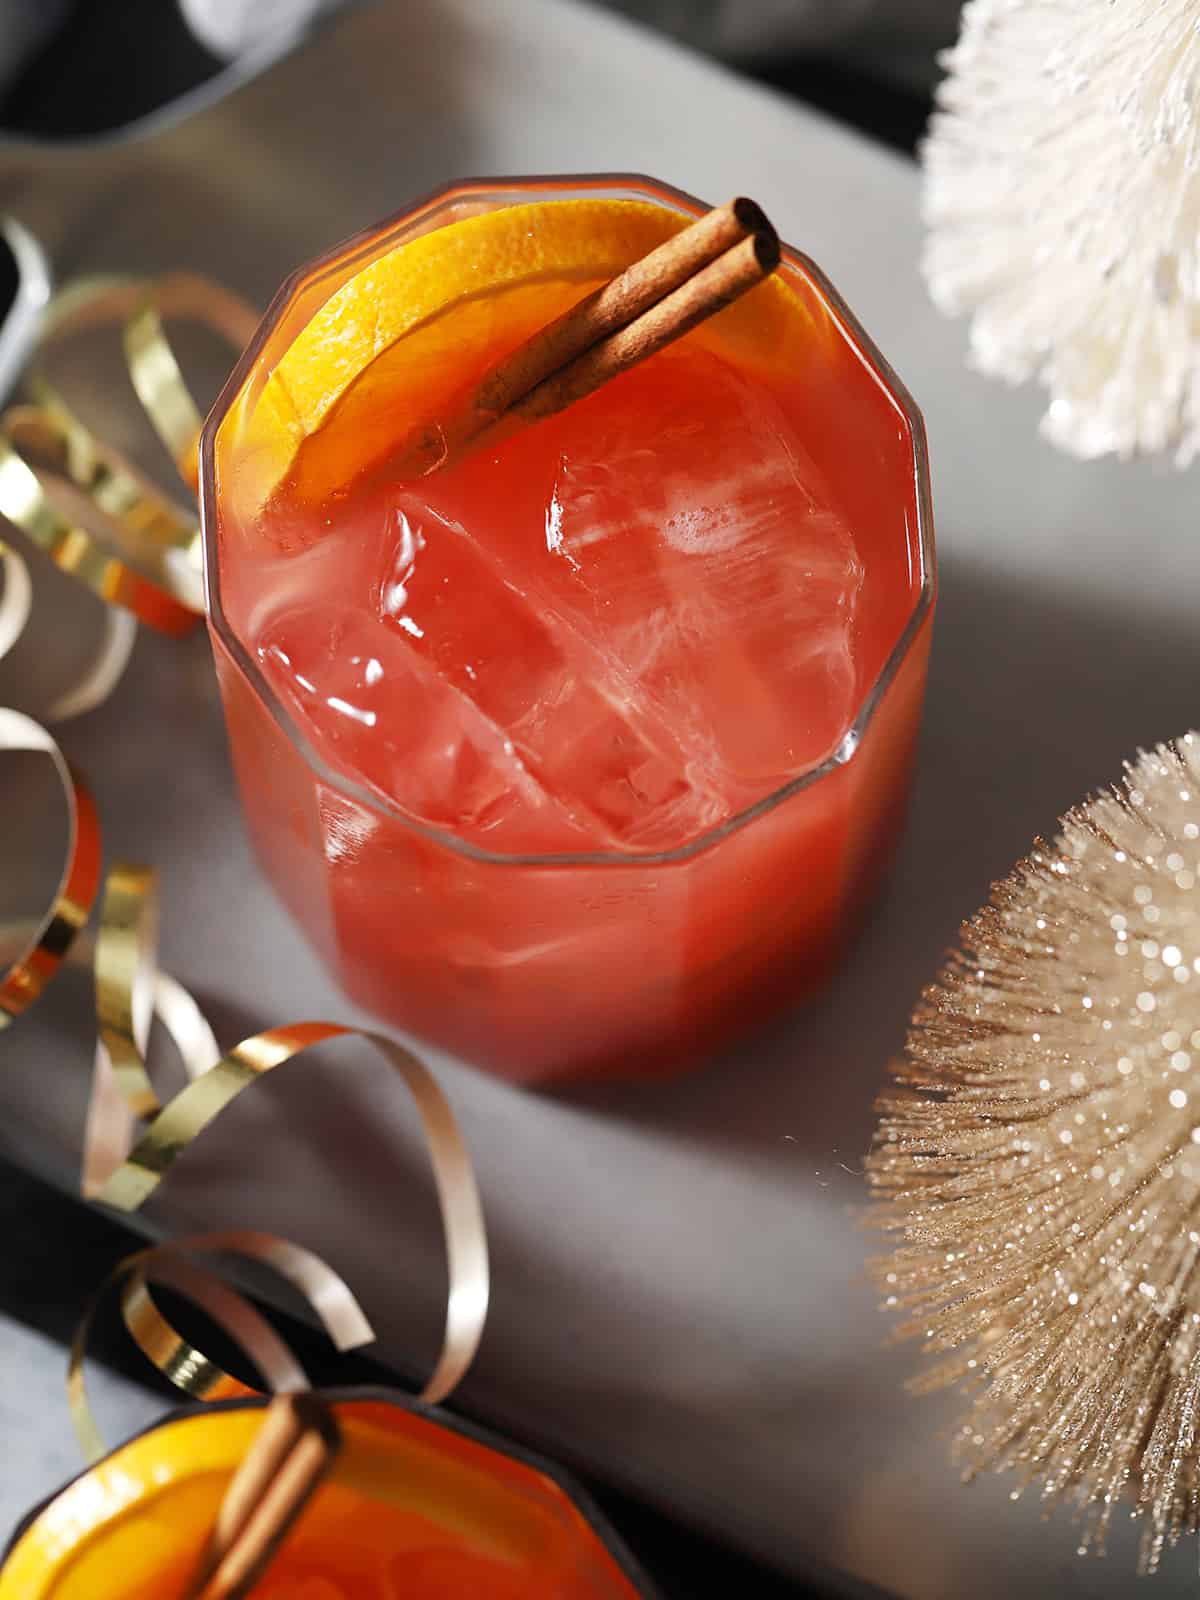 A glass of cherry holiday mocktail garnished with orange slices and cinnamon sticks.